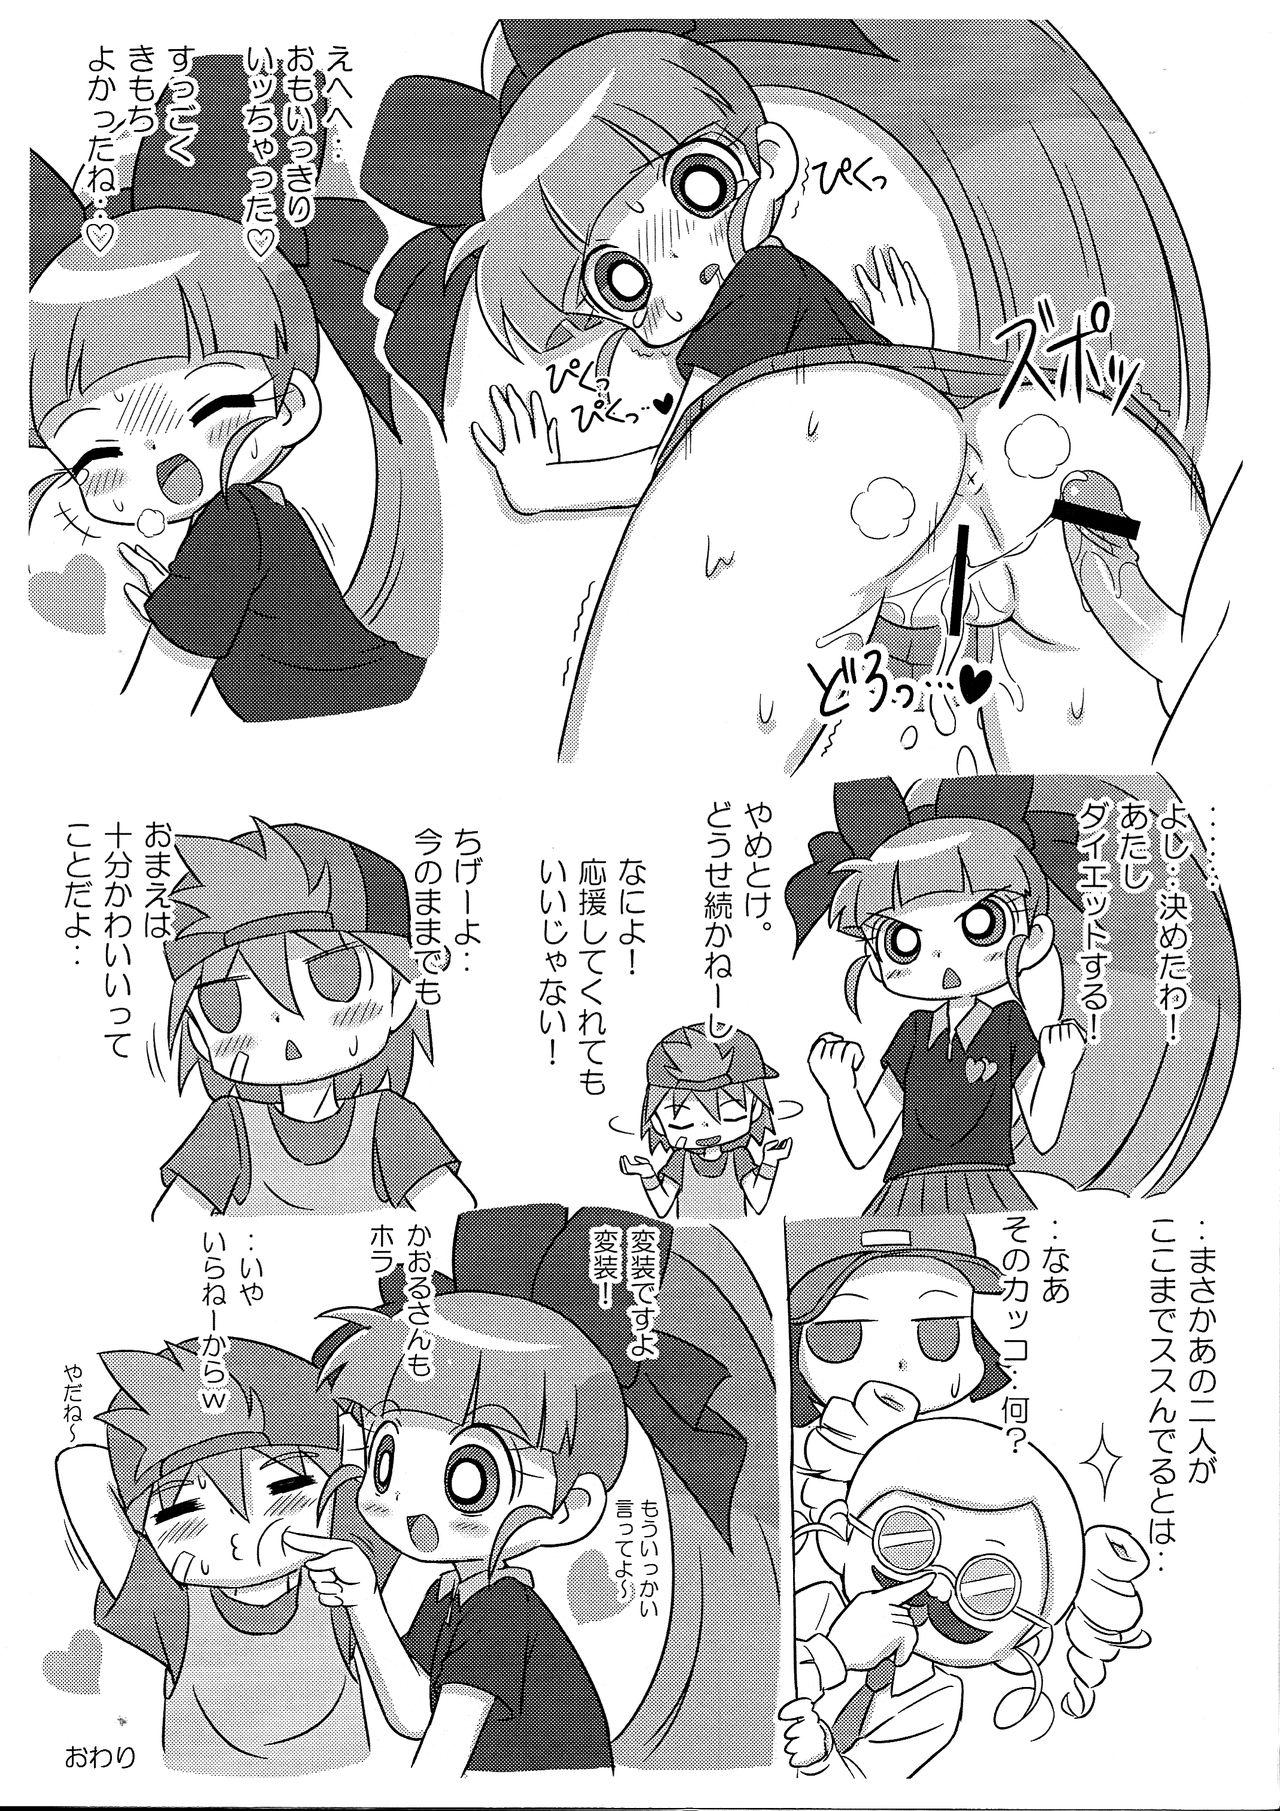 Petite Teenager 1-A Vol. 4 - Powerpuff girls z Transsexual - Page 9